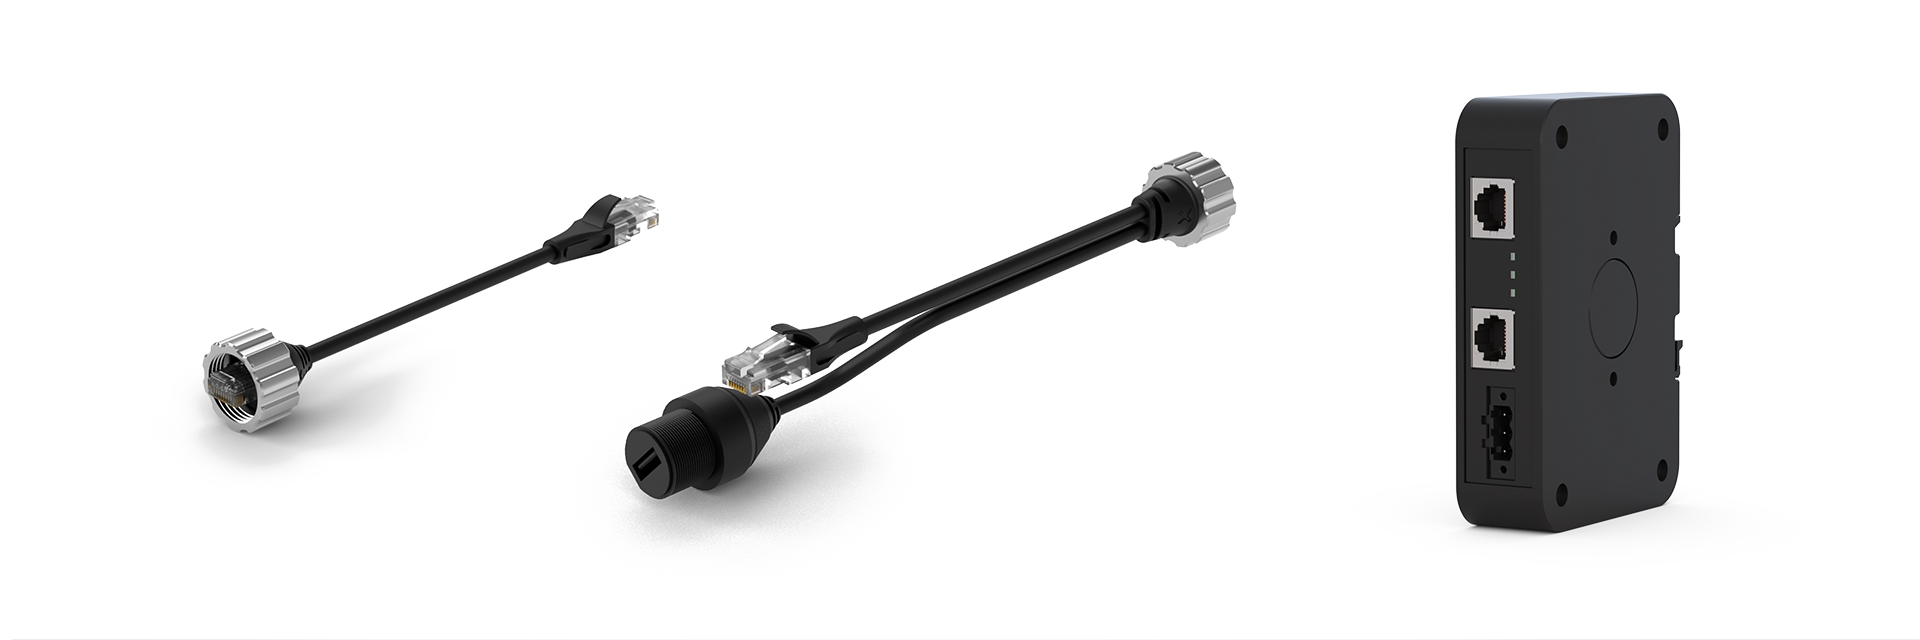 Cables for PoE and Ethernet/USB, PoE injector for the C6 X1 panels distributed by KEB Automation